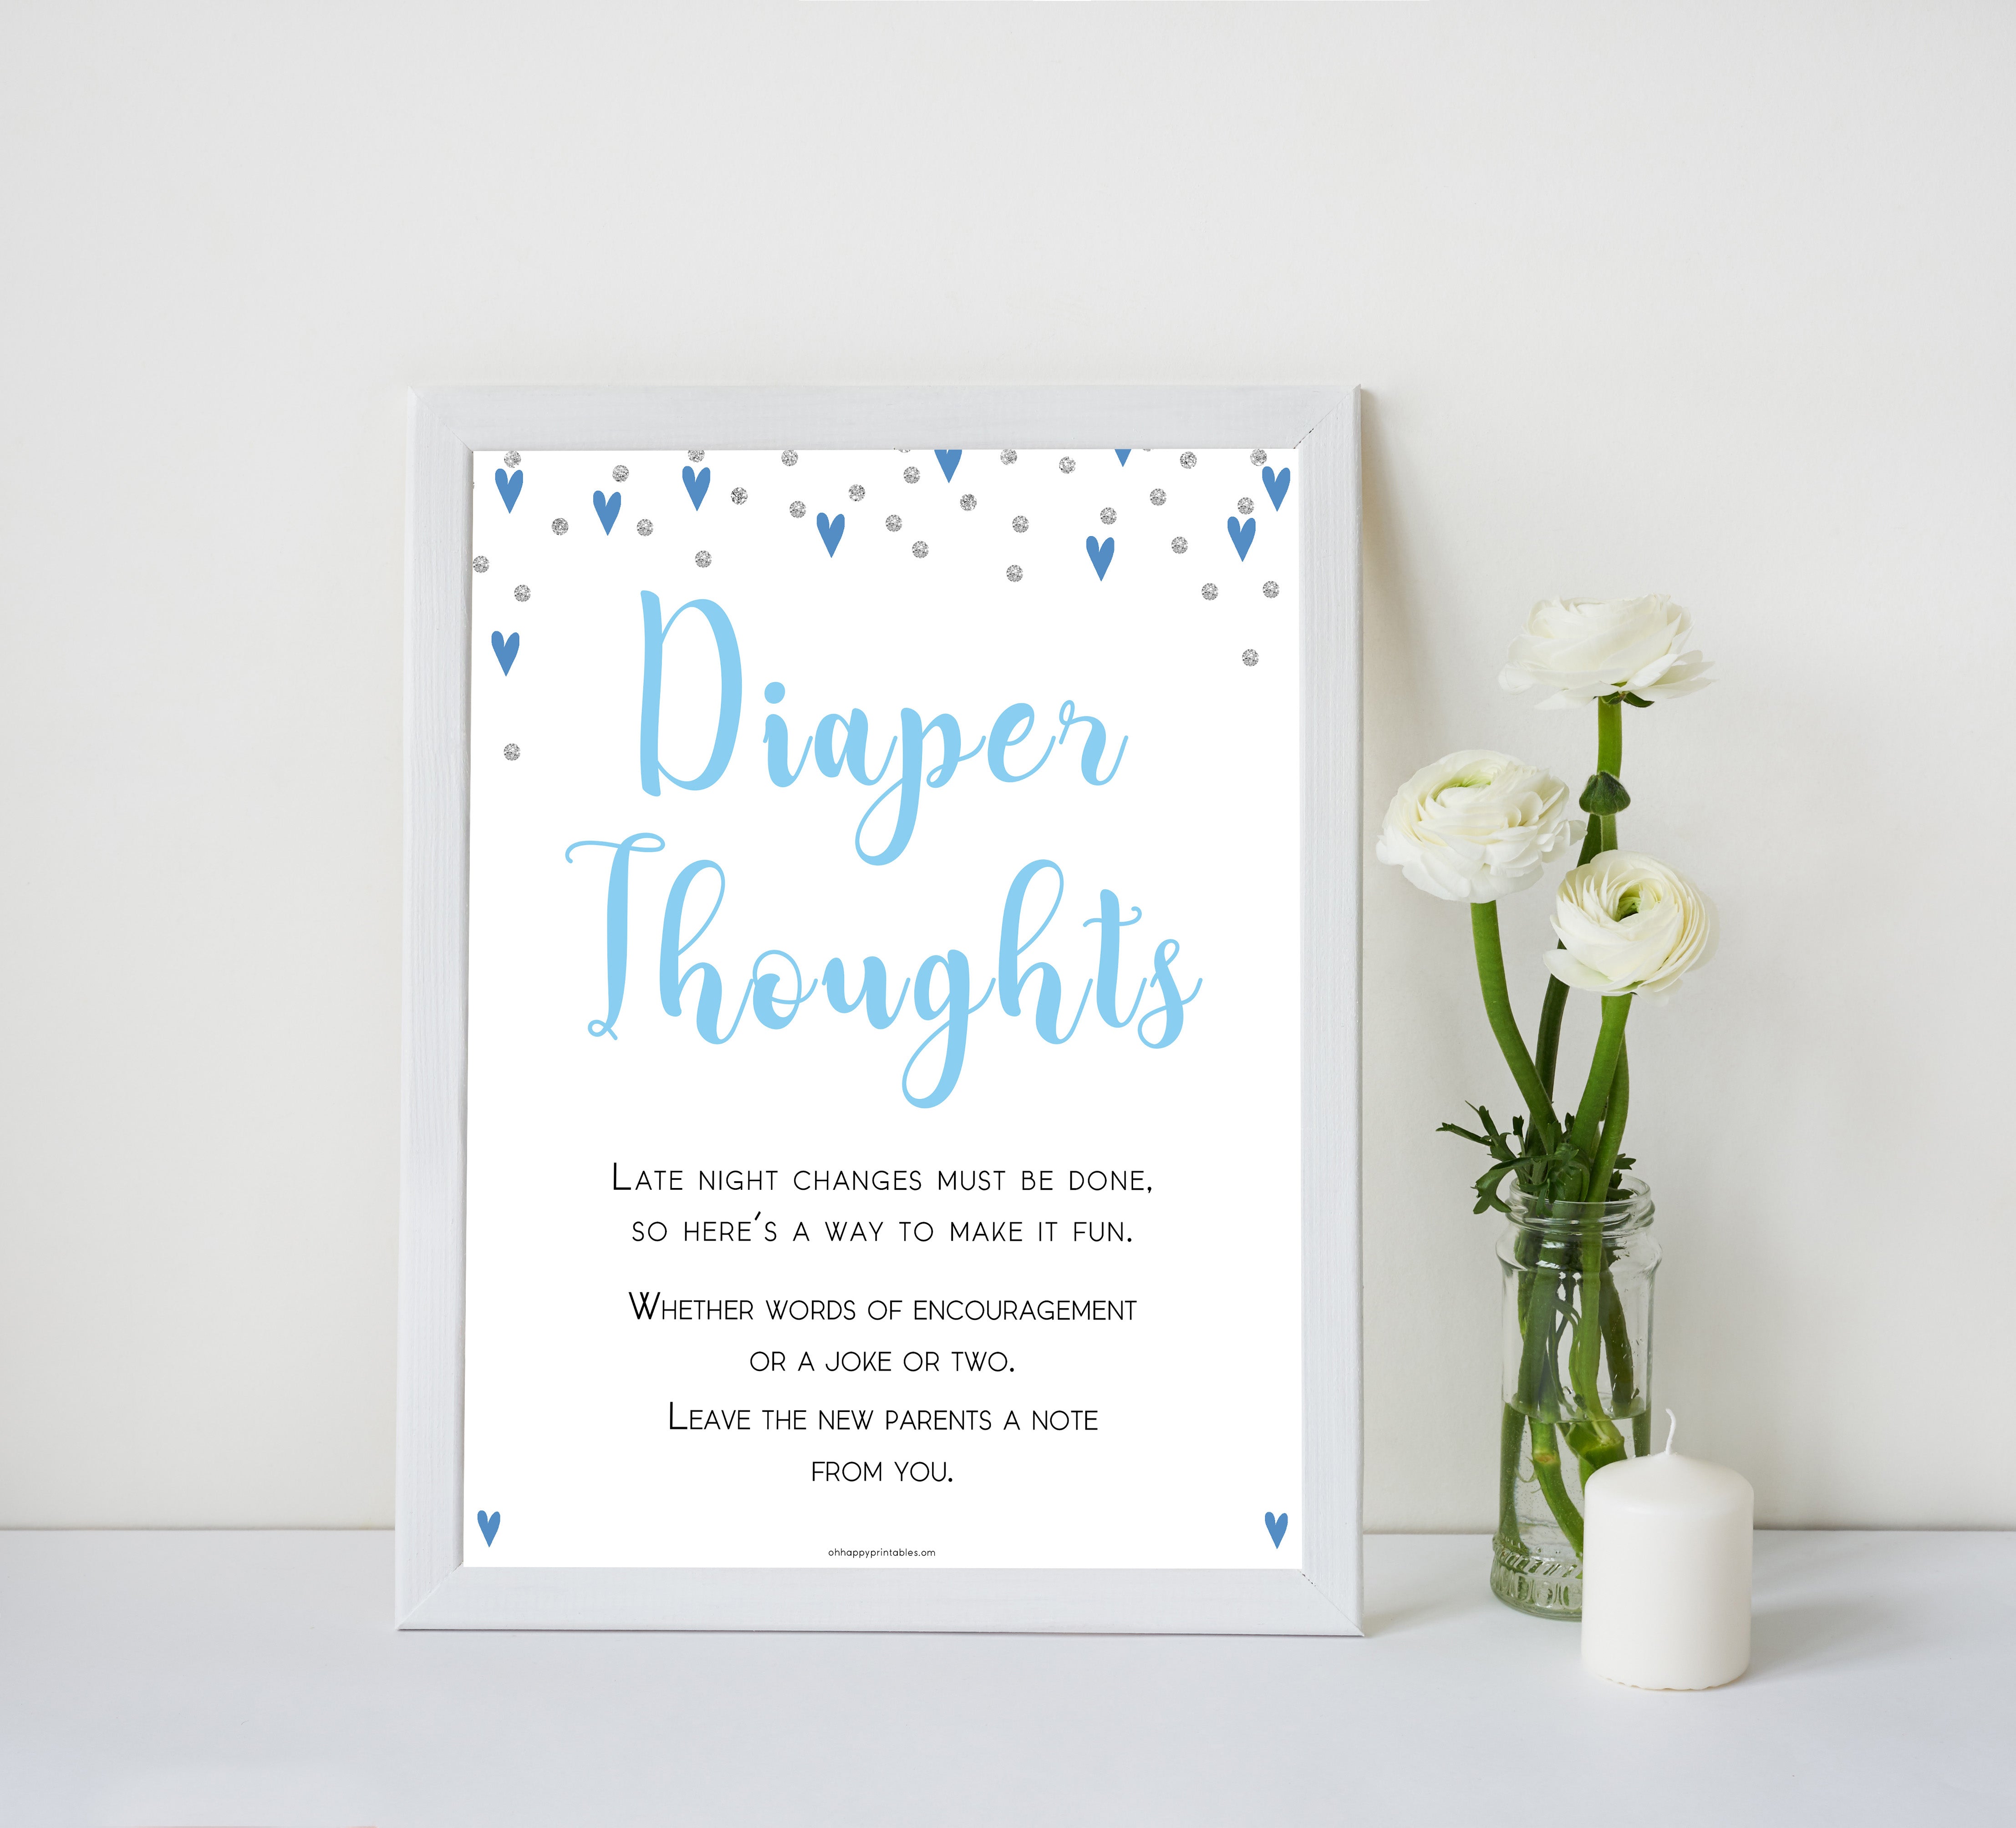 diaper thoughts game, late night diapers, Printable baby shower games, small blue hearts fun baby games, baby shower games, fun baby shower ideas, top baby shower ideas, silver baby shower, blue hearts baby shower ideas